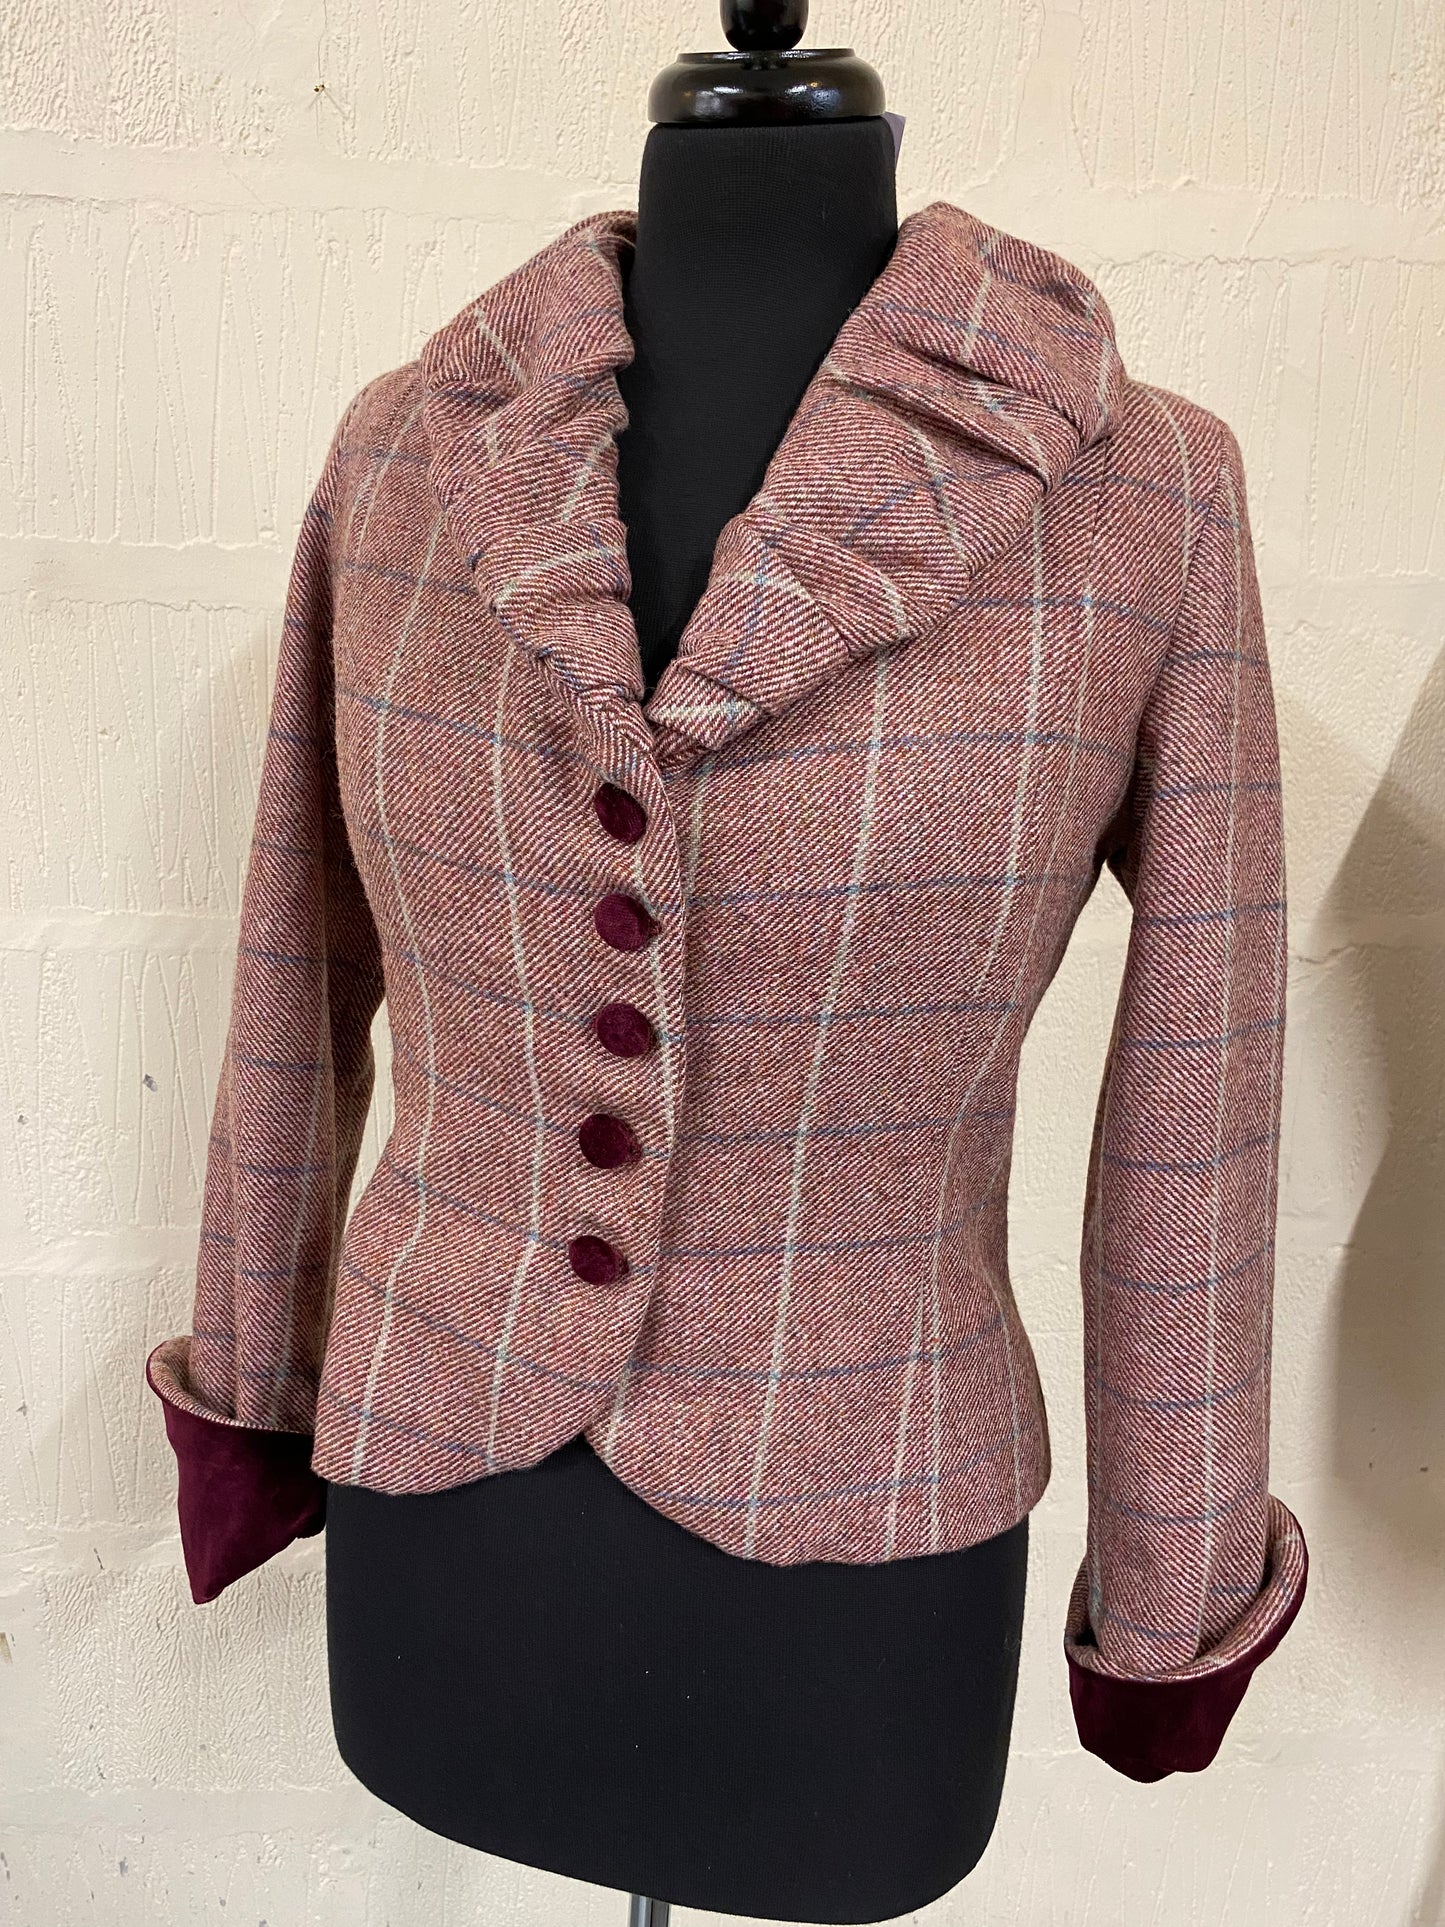 Vintage Soft Pink and Maroon Check Wool Jacket Size 8